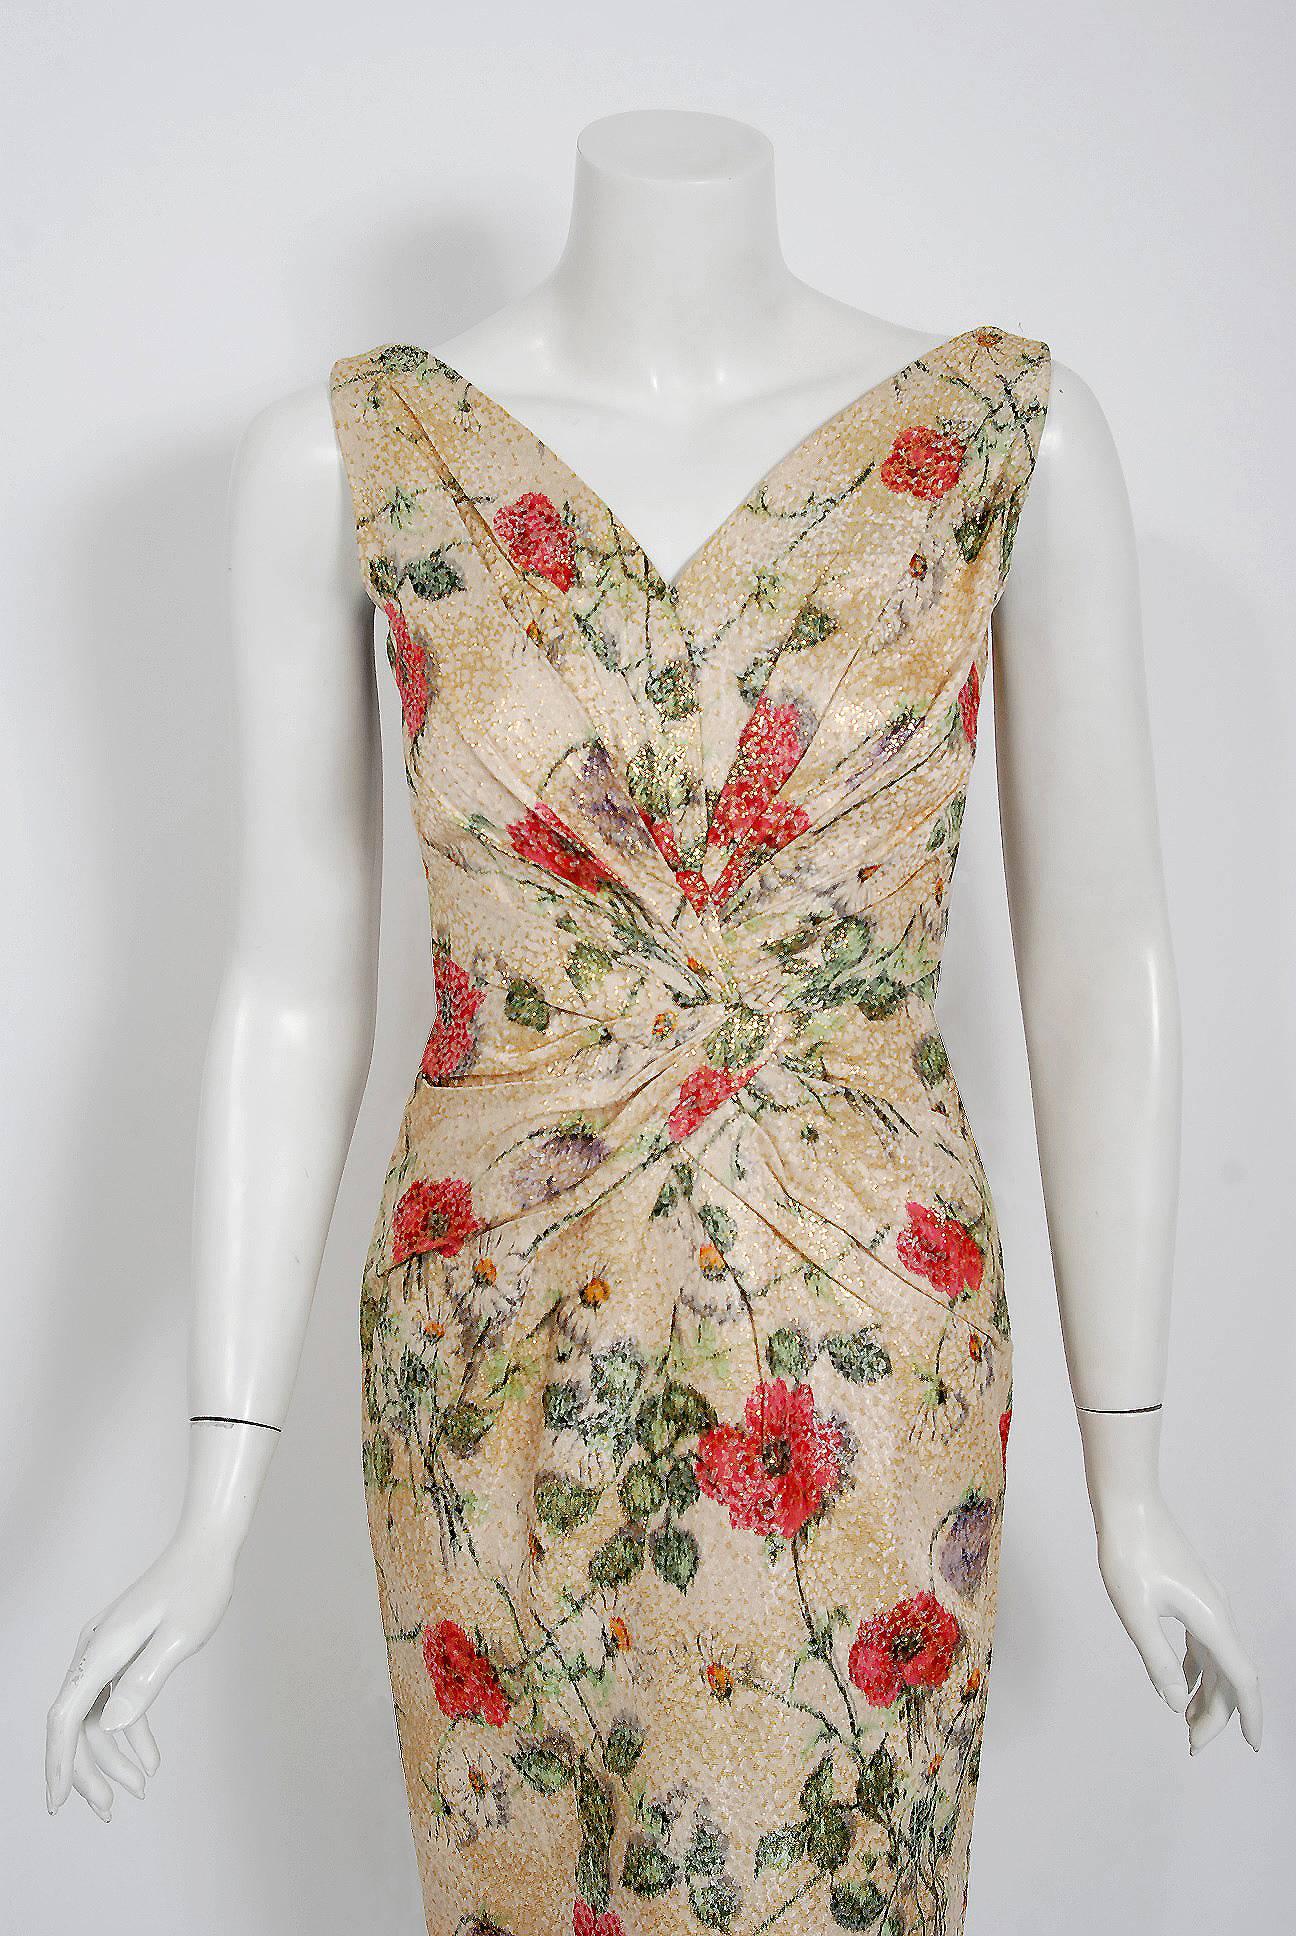 An alluring Ceil Chapman cocktail dress in the most stunning watercolor floral silk-brocade! The metallic shimmer adds a perfect amount of sparkle to this seductive treasure.  I adore the low-cut plunge, heavily-gathered sleeveless bodice. This